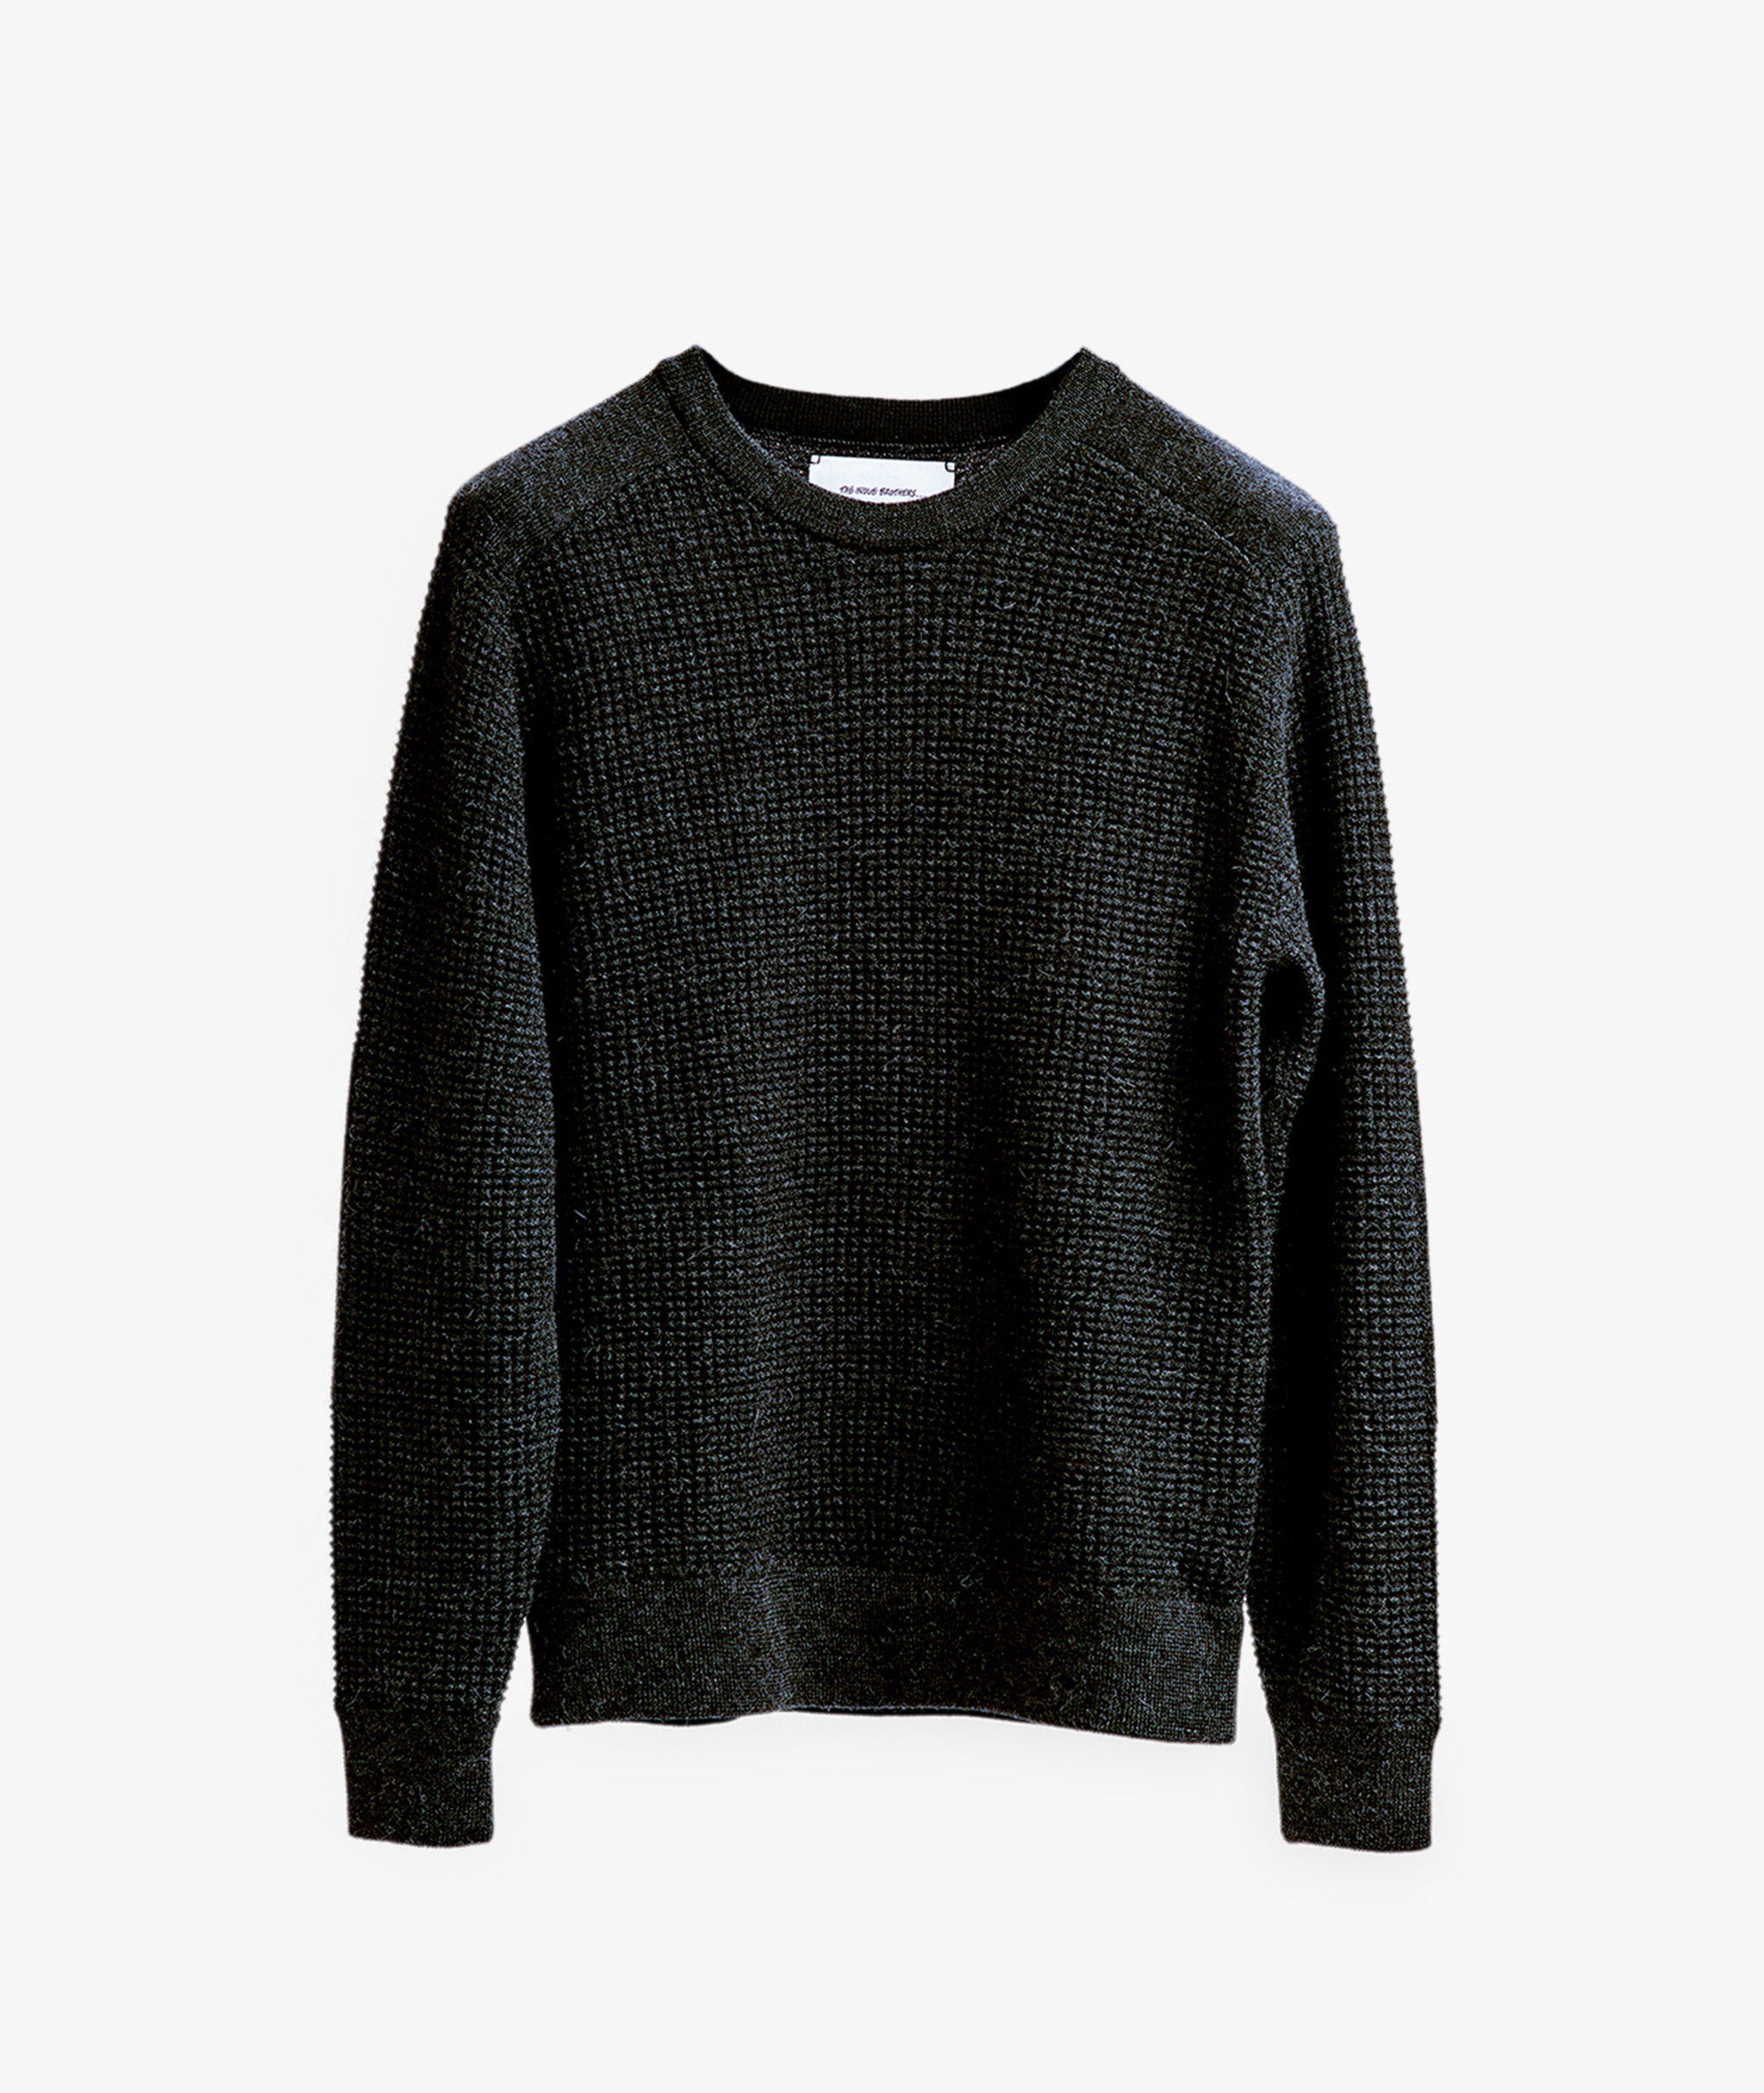 Norse Store | Shipping Worldwide - The Inoue Brothers Baby Alpaca ...